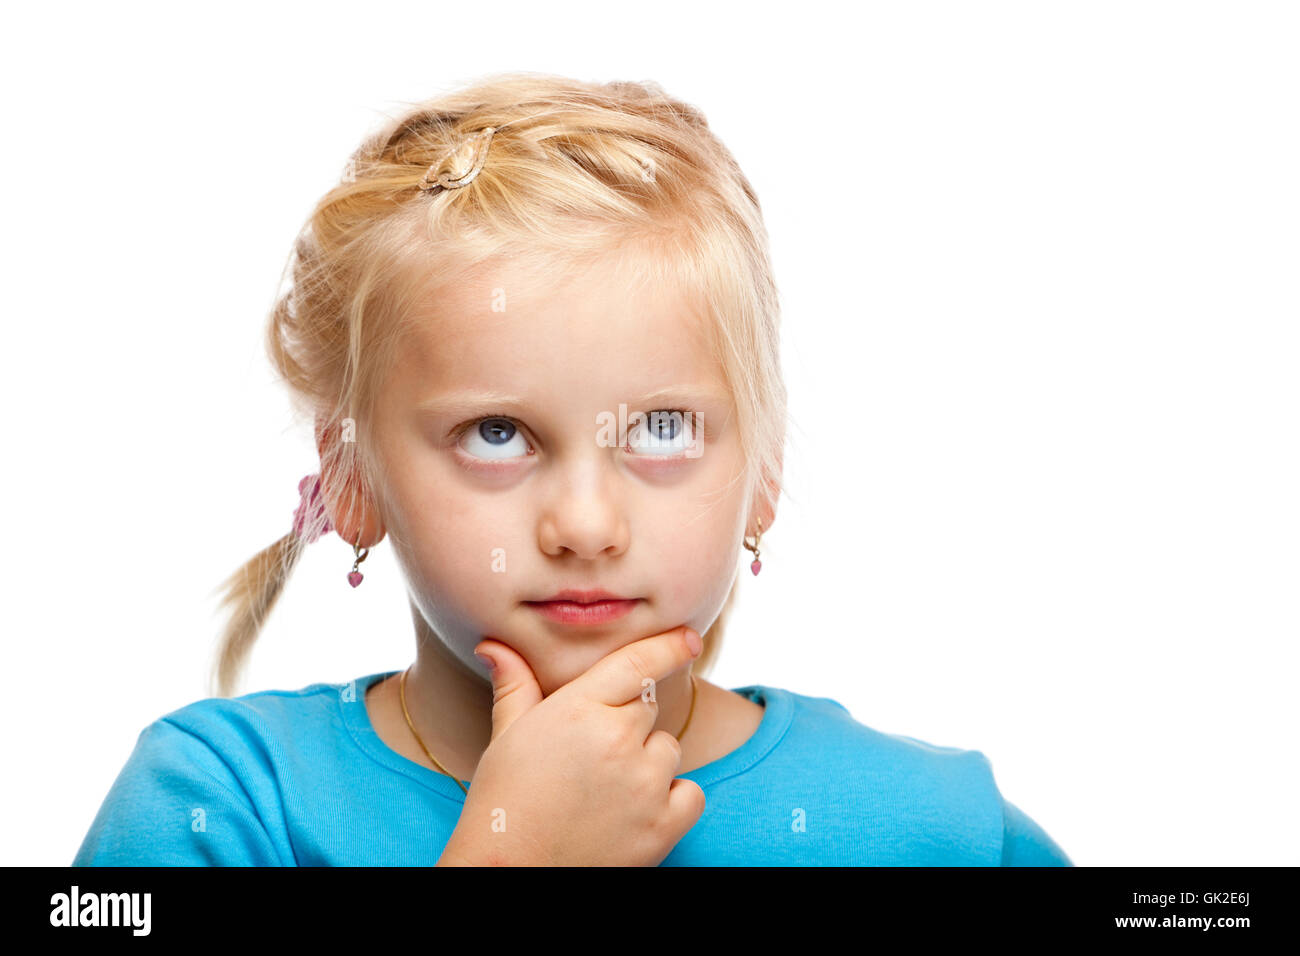 young girl thinking Stock Photo